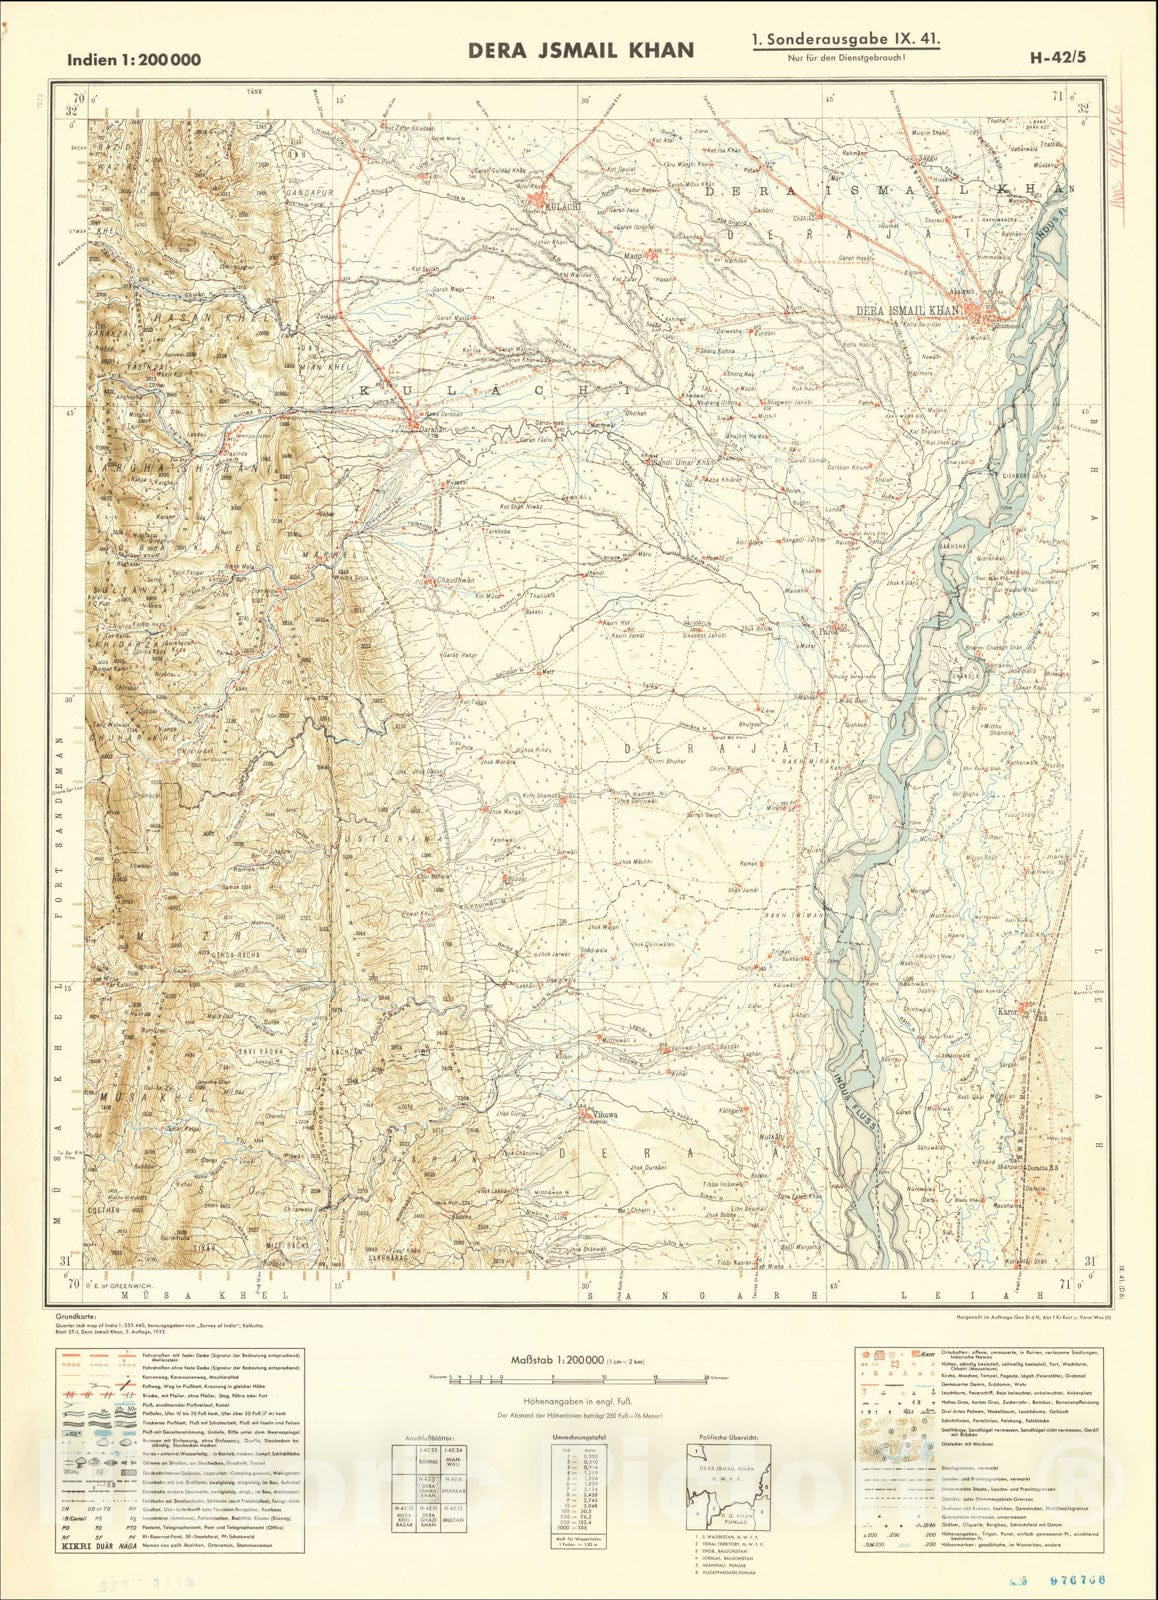 Historic Map : (Second World War - India) Indien 1: 200 000, 1932, General Staff of the German Army, Vintage Wall Art